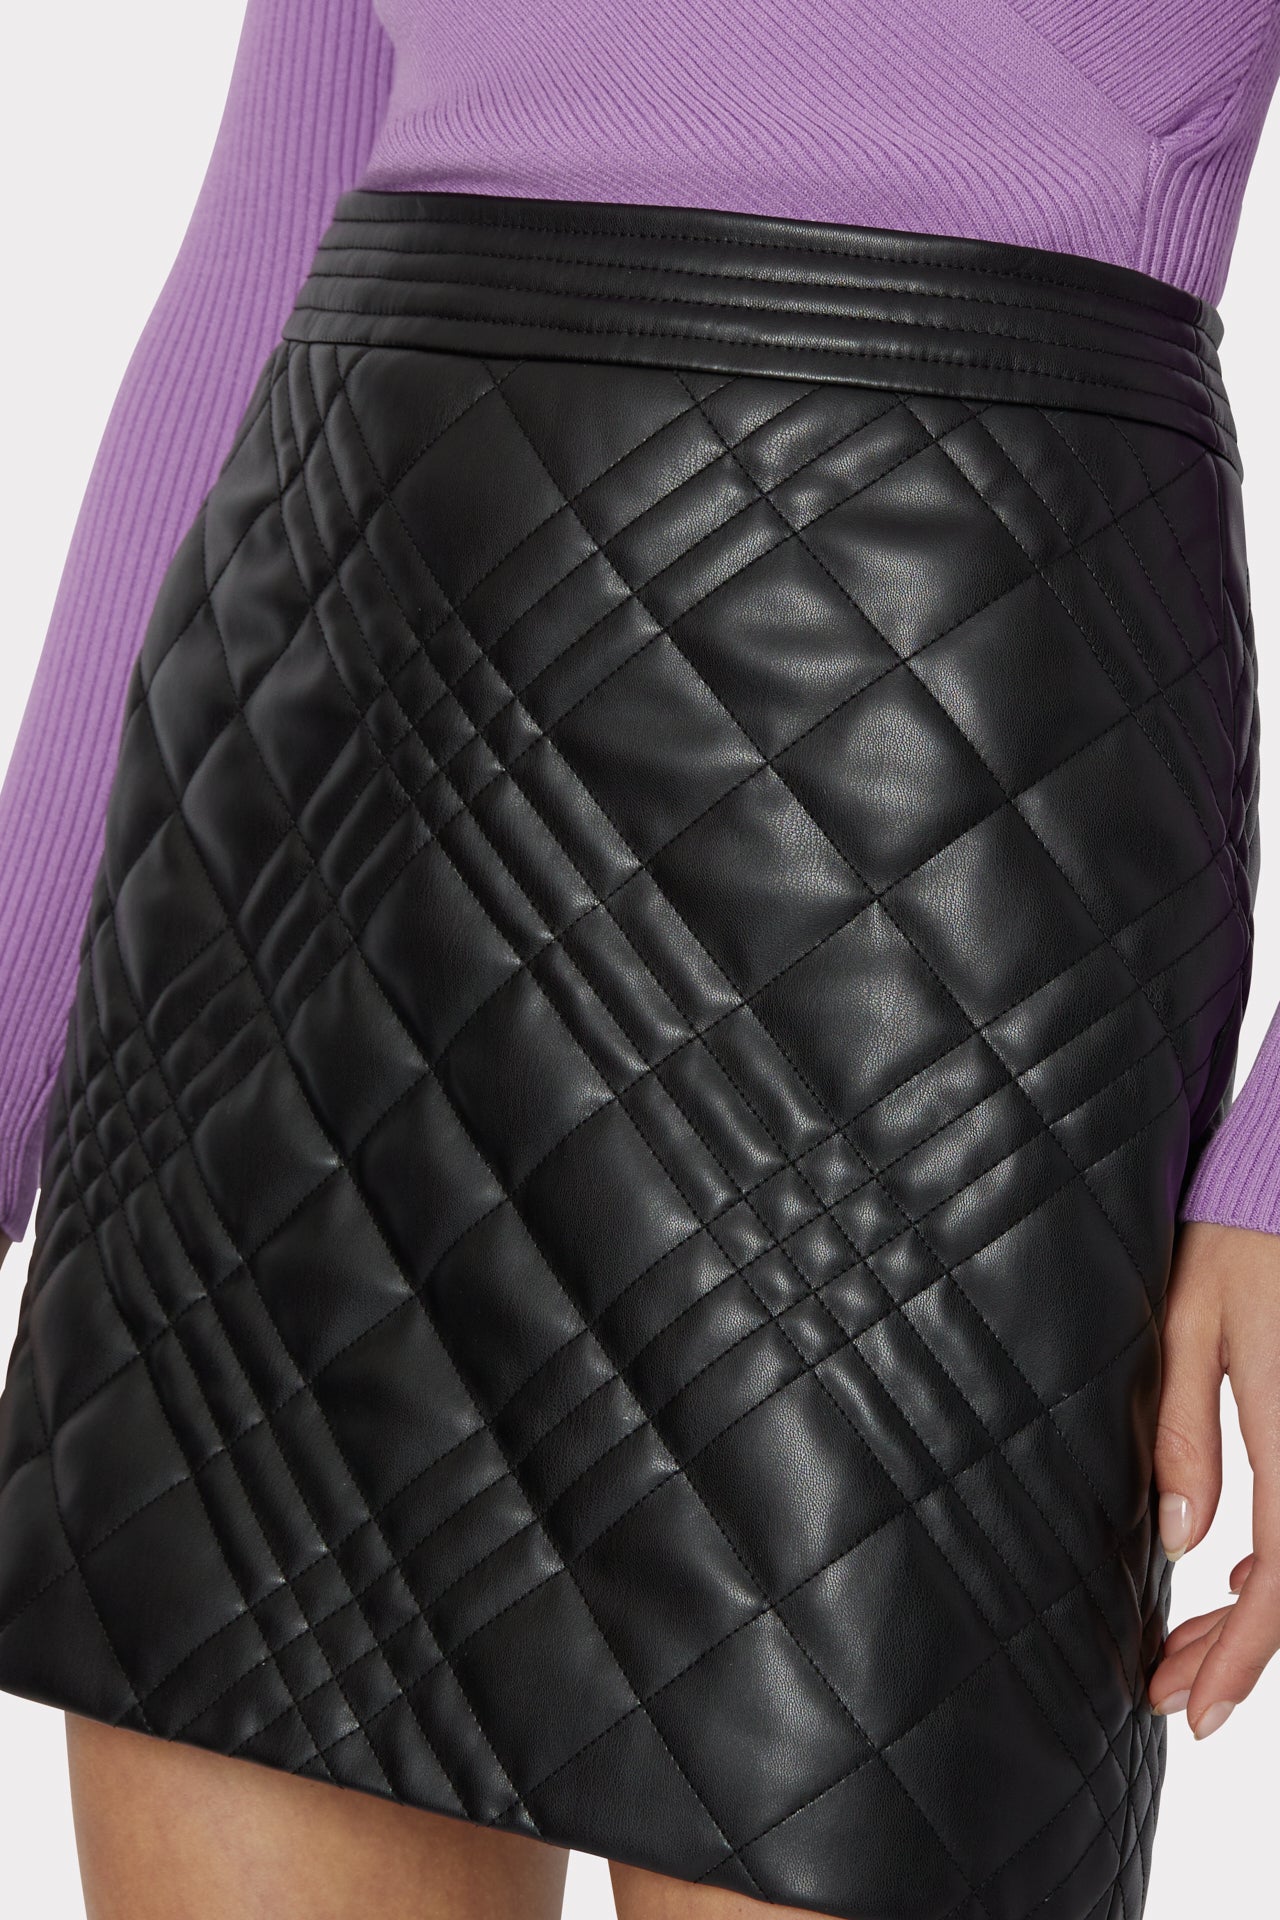 Hailey Quilted Vegan Leather Skirt